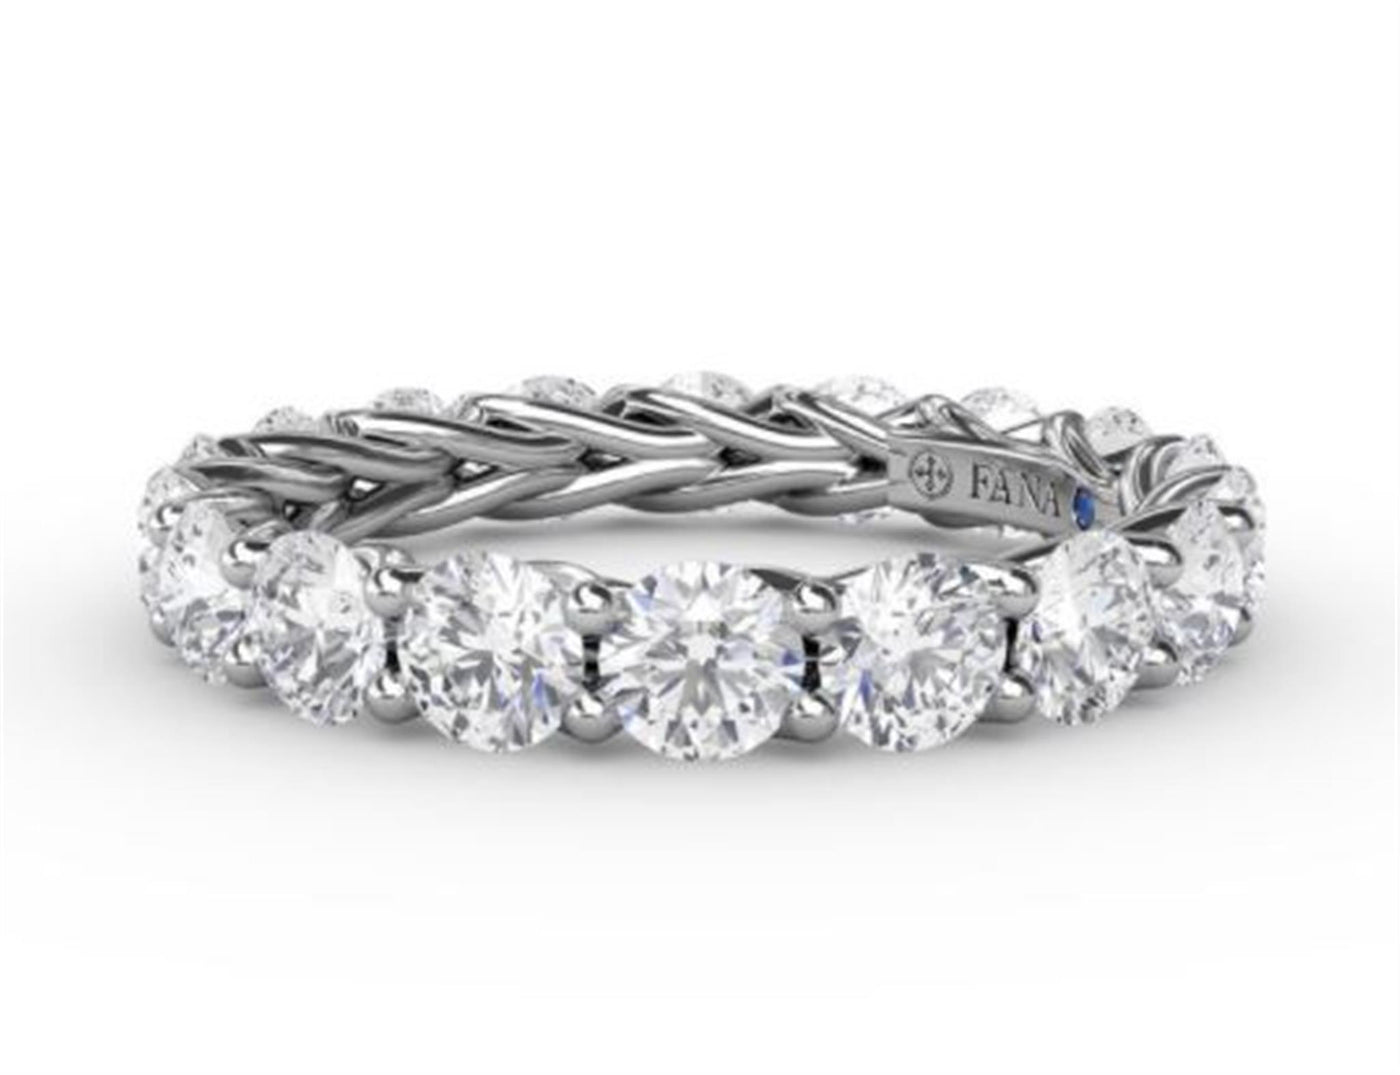 14K White Gold 2.88ctw Diamond Eternity Band 
Featuring a Polished Finish